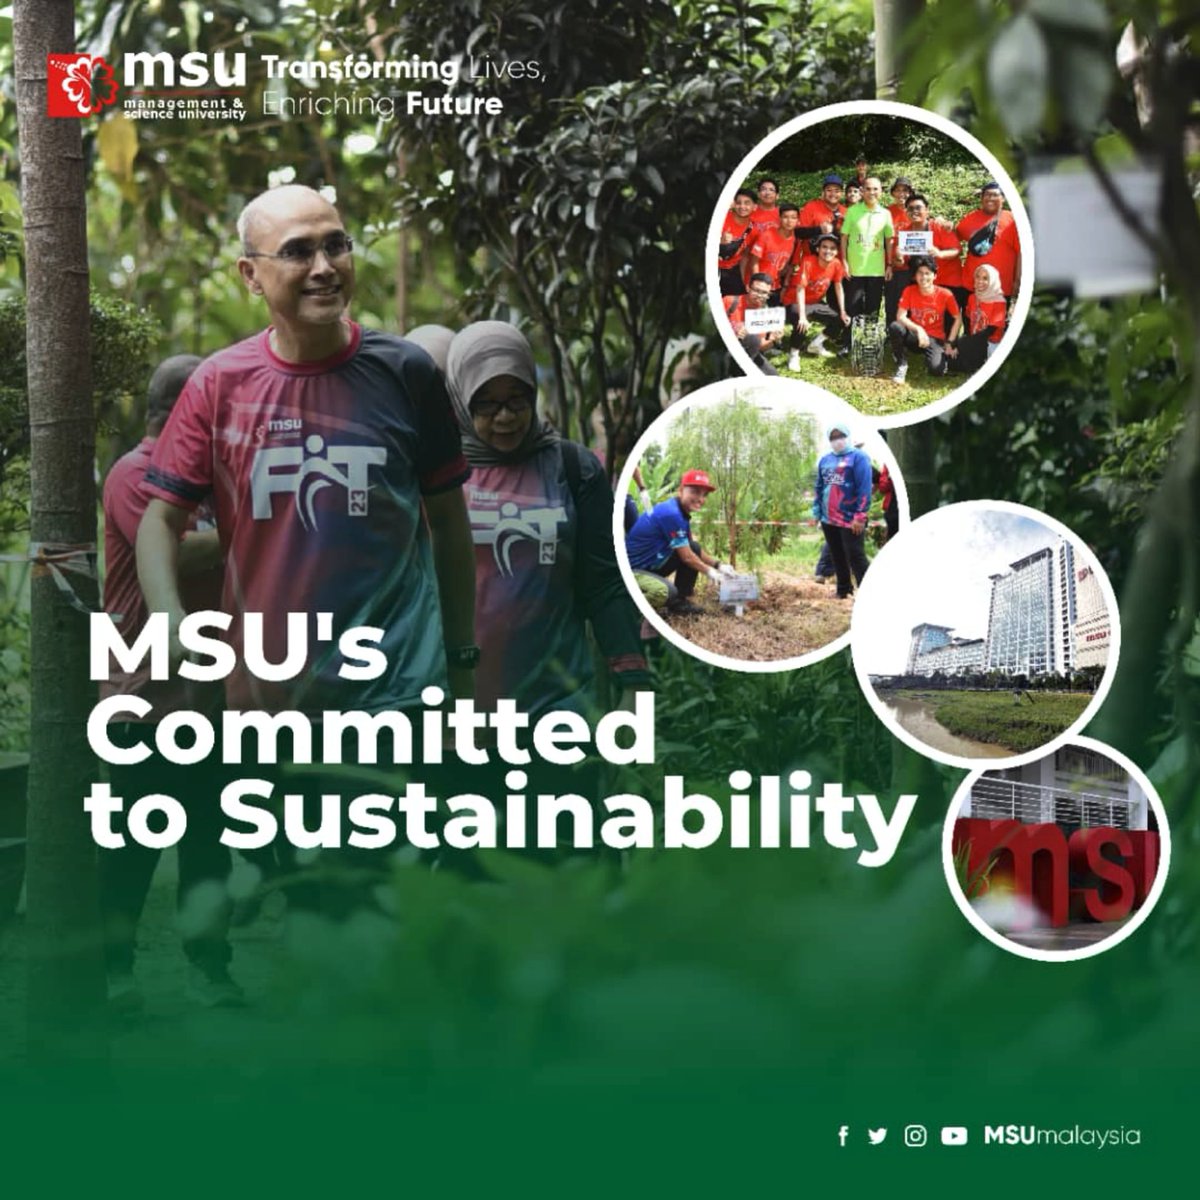 Matters concerning sustainability involve everyone being actively committed to community engagements and environmental projects. Let's move on as #MSUrians working together towards a better future at @MSUMalaysia. @MSUCollege @msumcmalaysia #MSUSDG